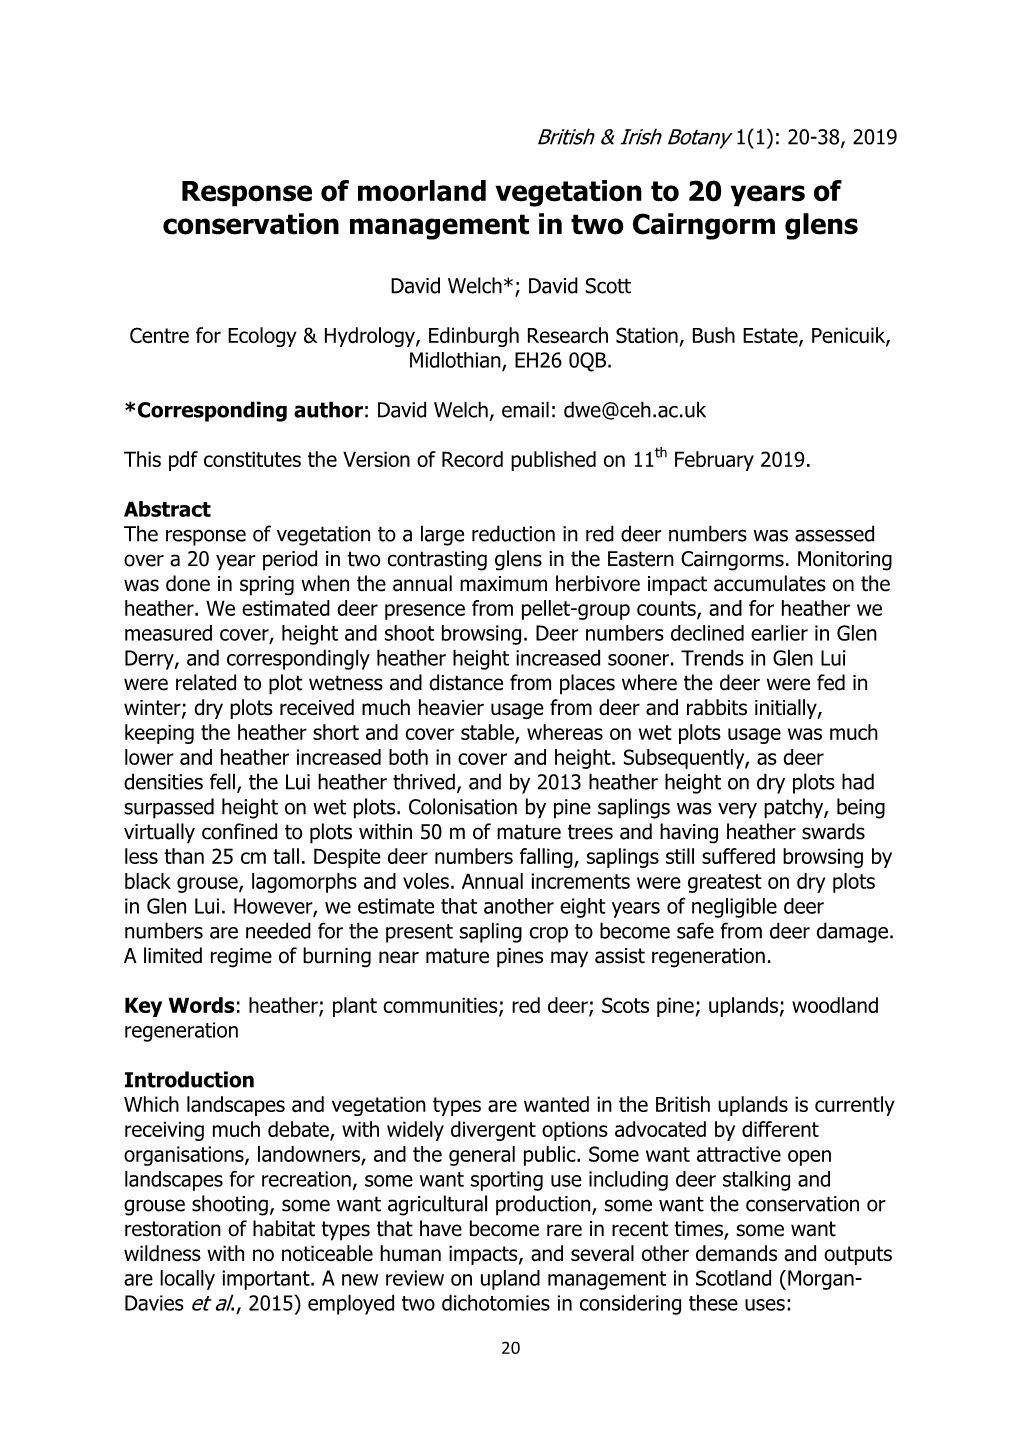 Response of Moorland Vegetation to 20 Years of Conservation Management in Two Cairngorm Glens